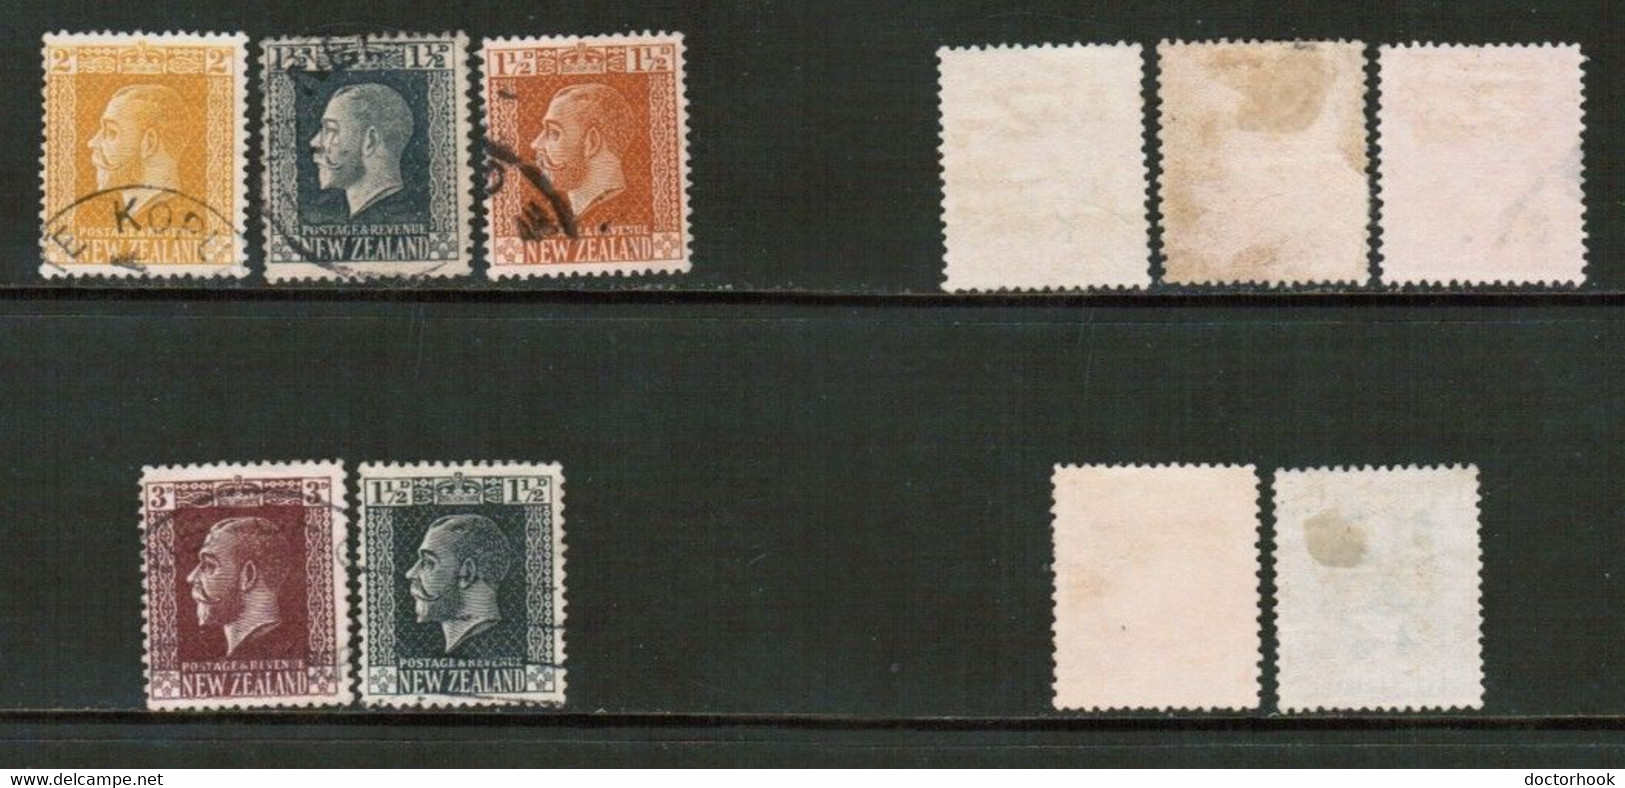 NEW ZEALAND   Scott # 160-4 USED (CONDITION AS PER SCAN) (WW-1-64) - Used Stamps